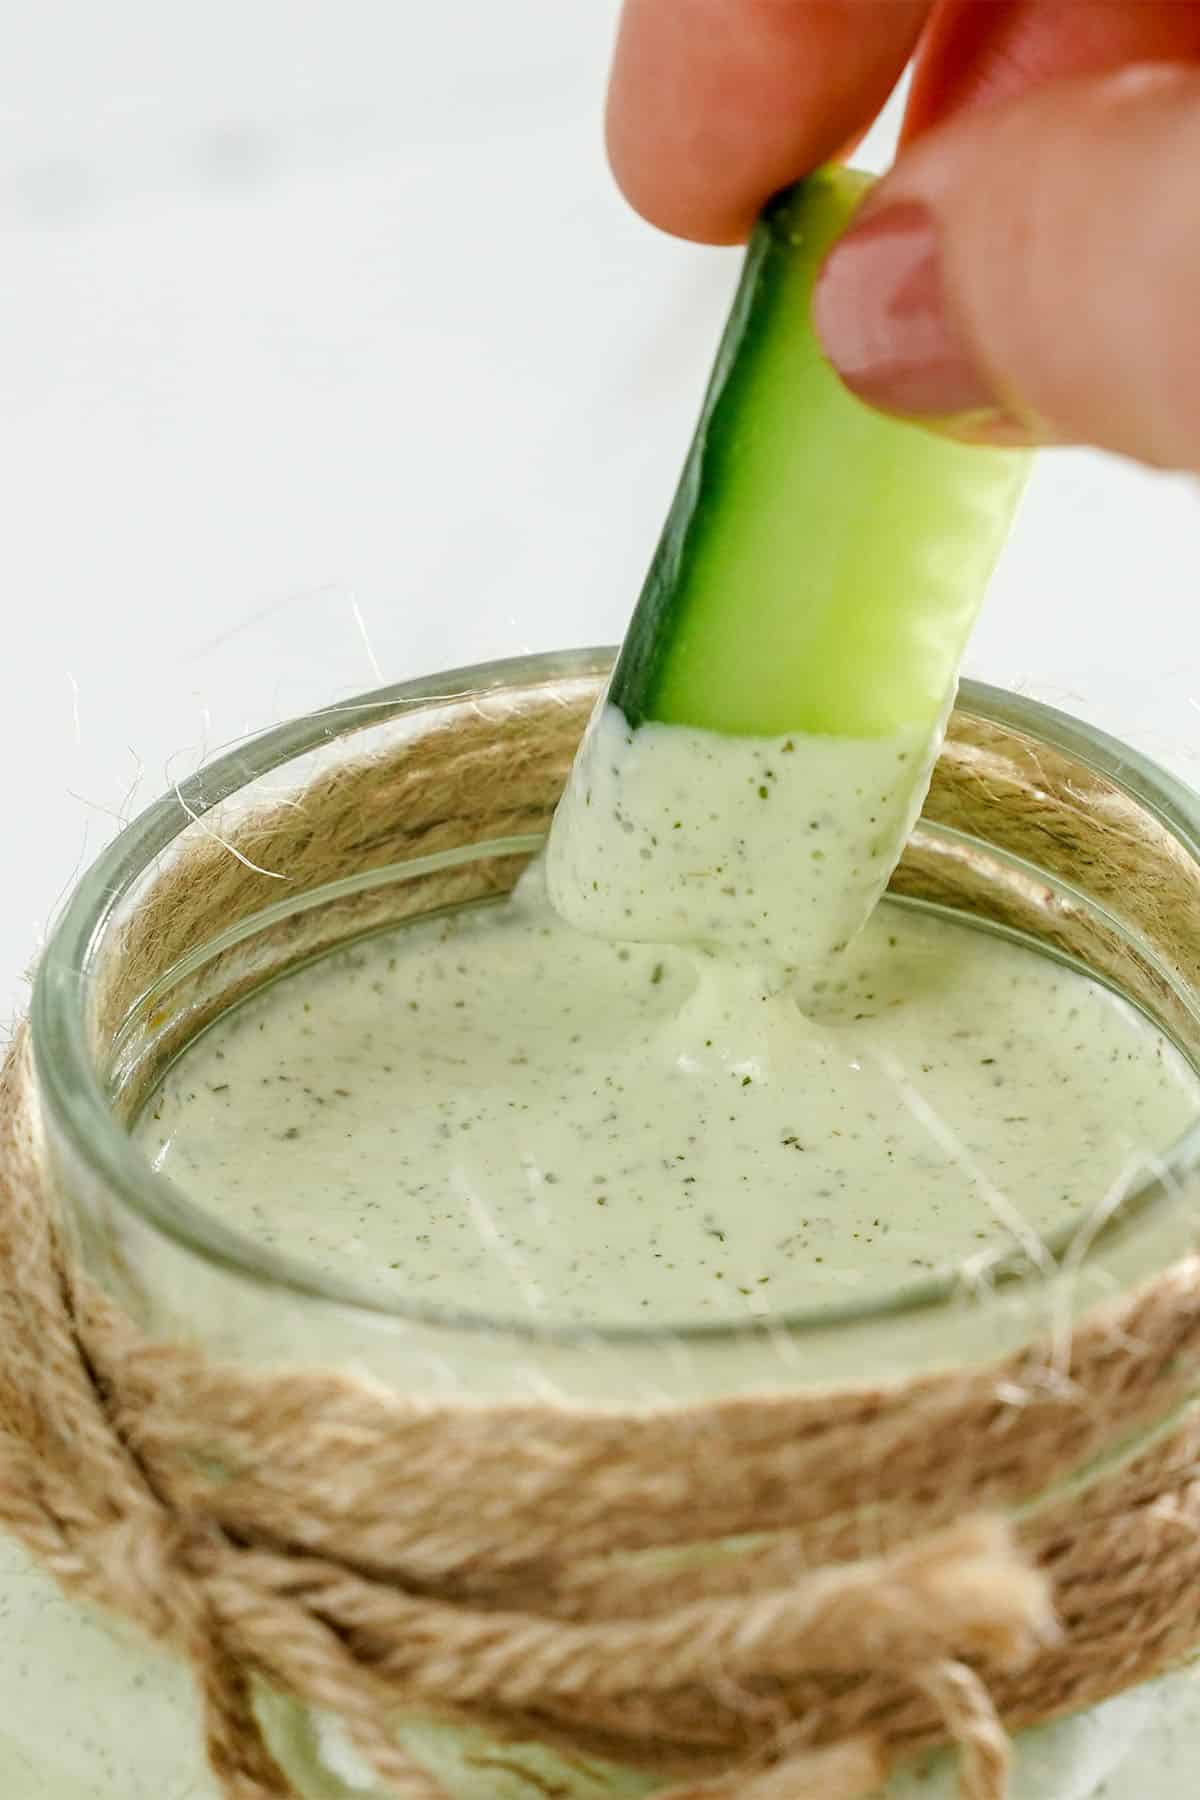 Cucumber being dipped into homemade cucumber ranch dressing